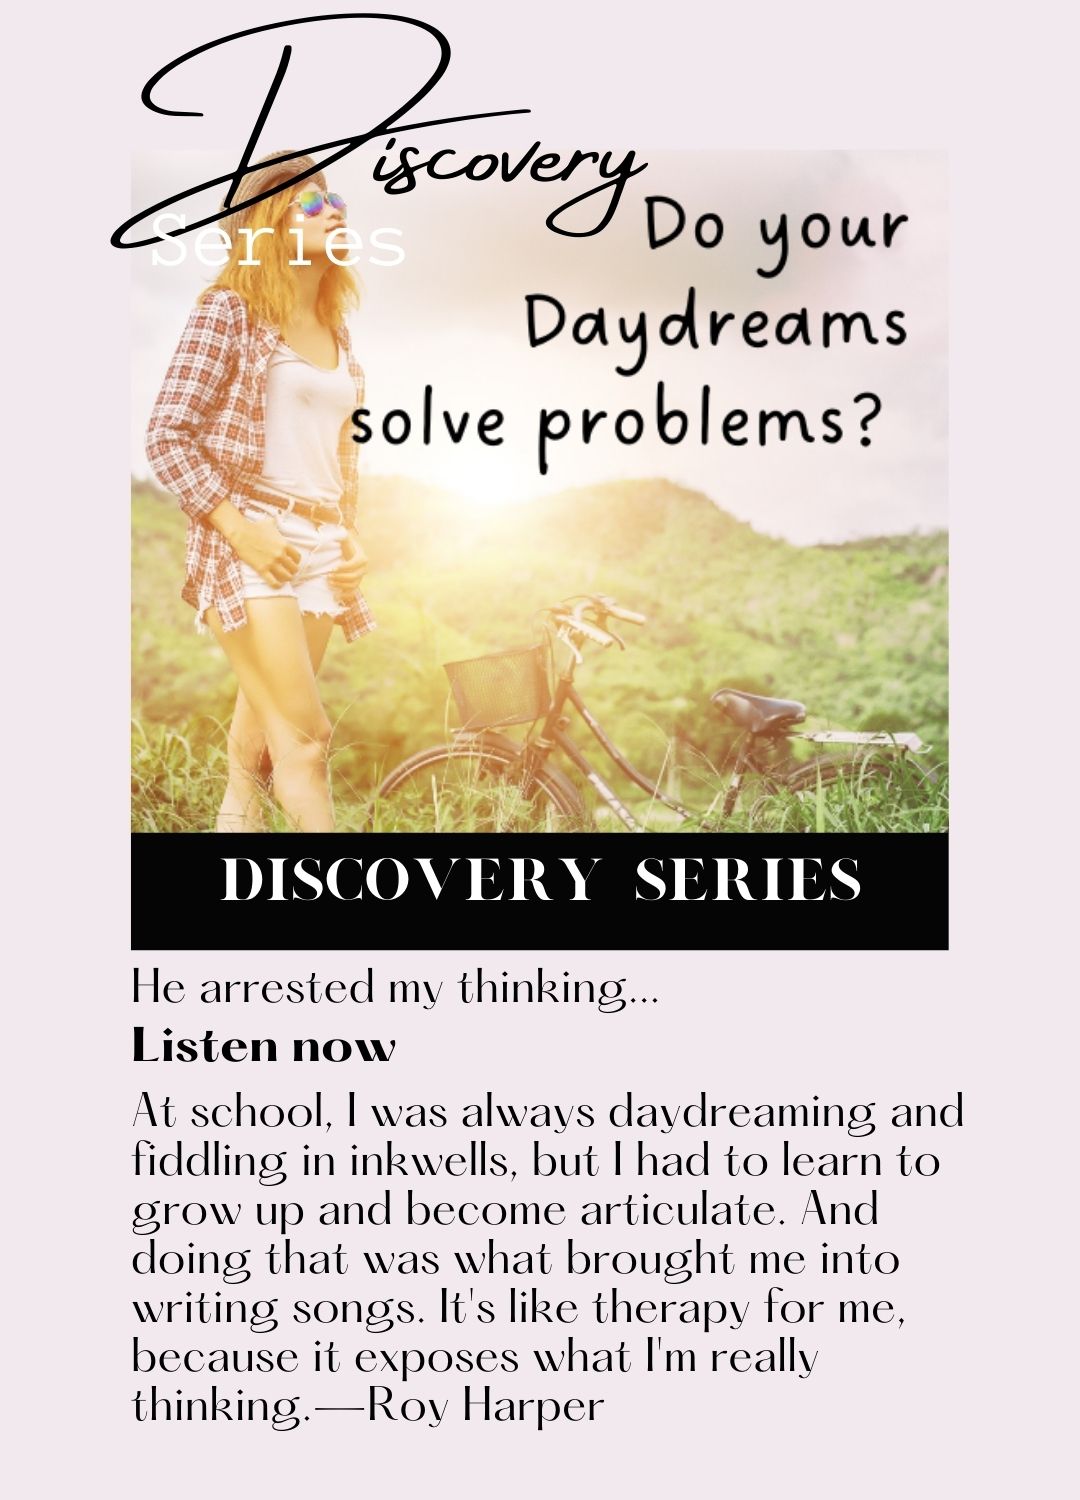 Intentional Now Podcast Do your Daydreams solve problems? 